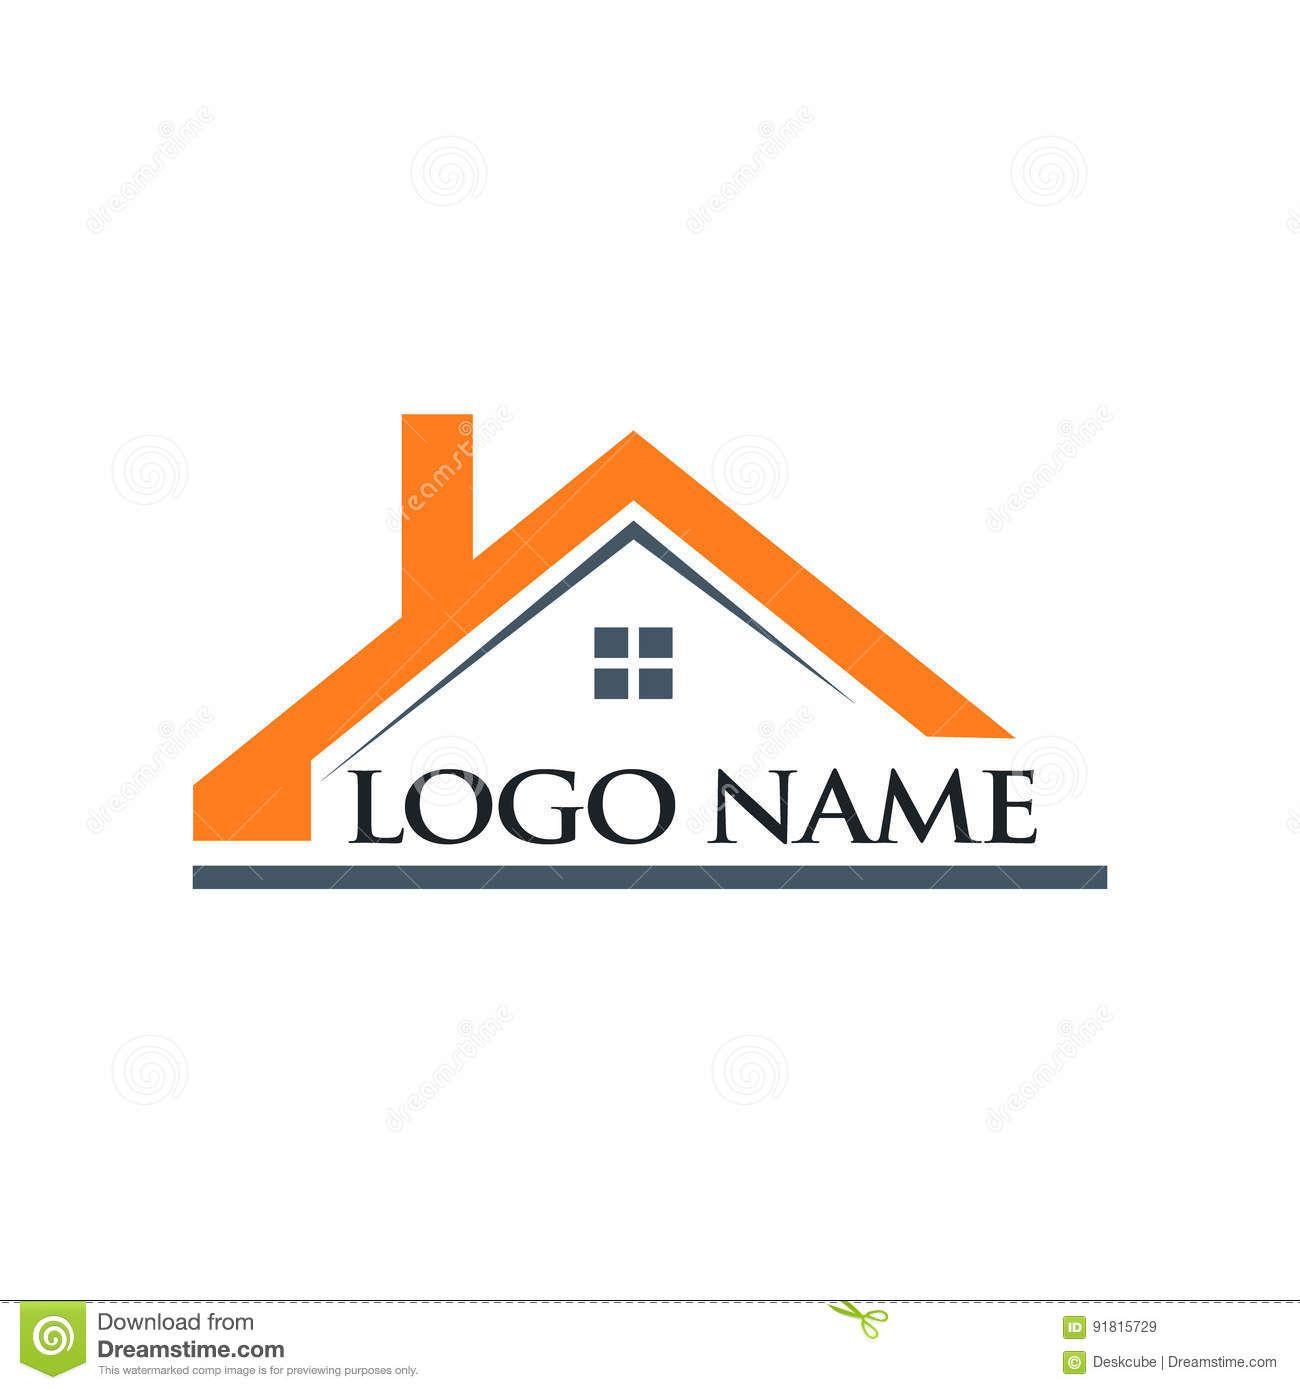 Roof Logo - Roof House and Logo Name Illustration. House Logo. House roof